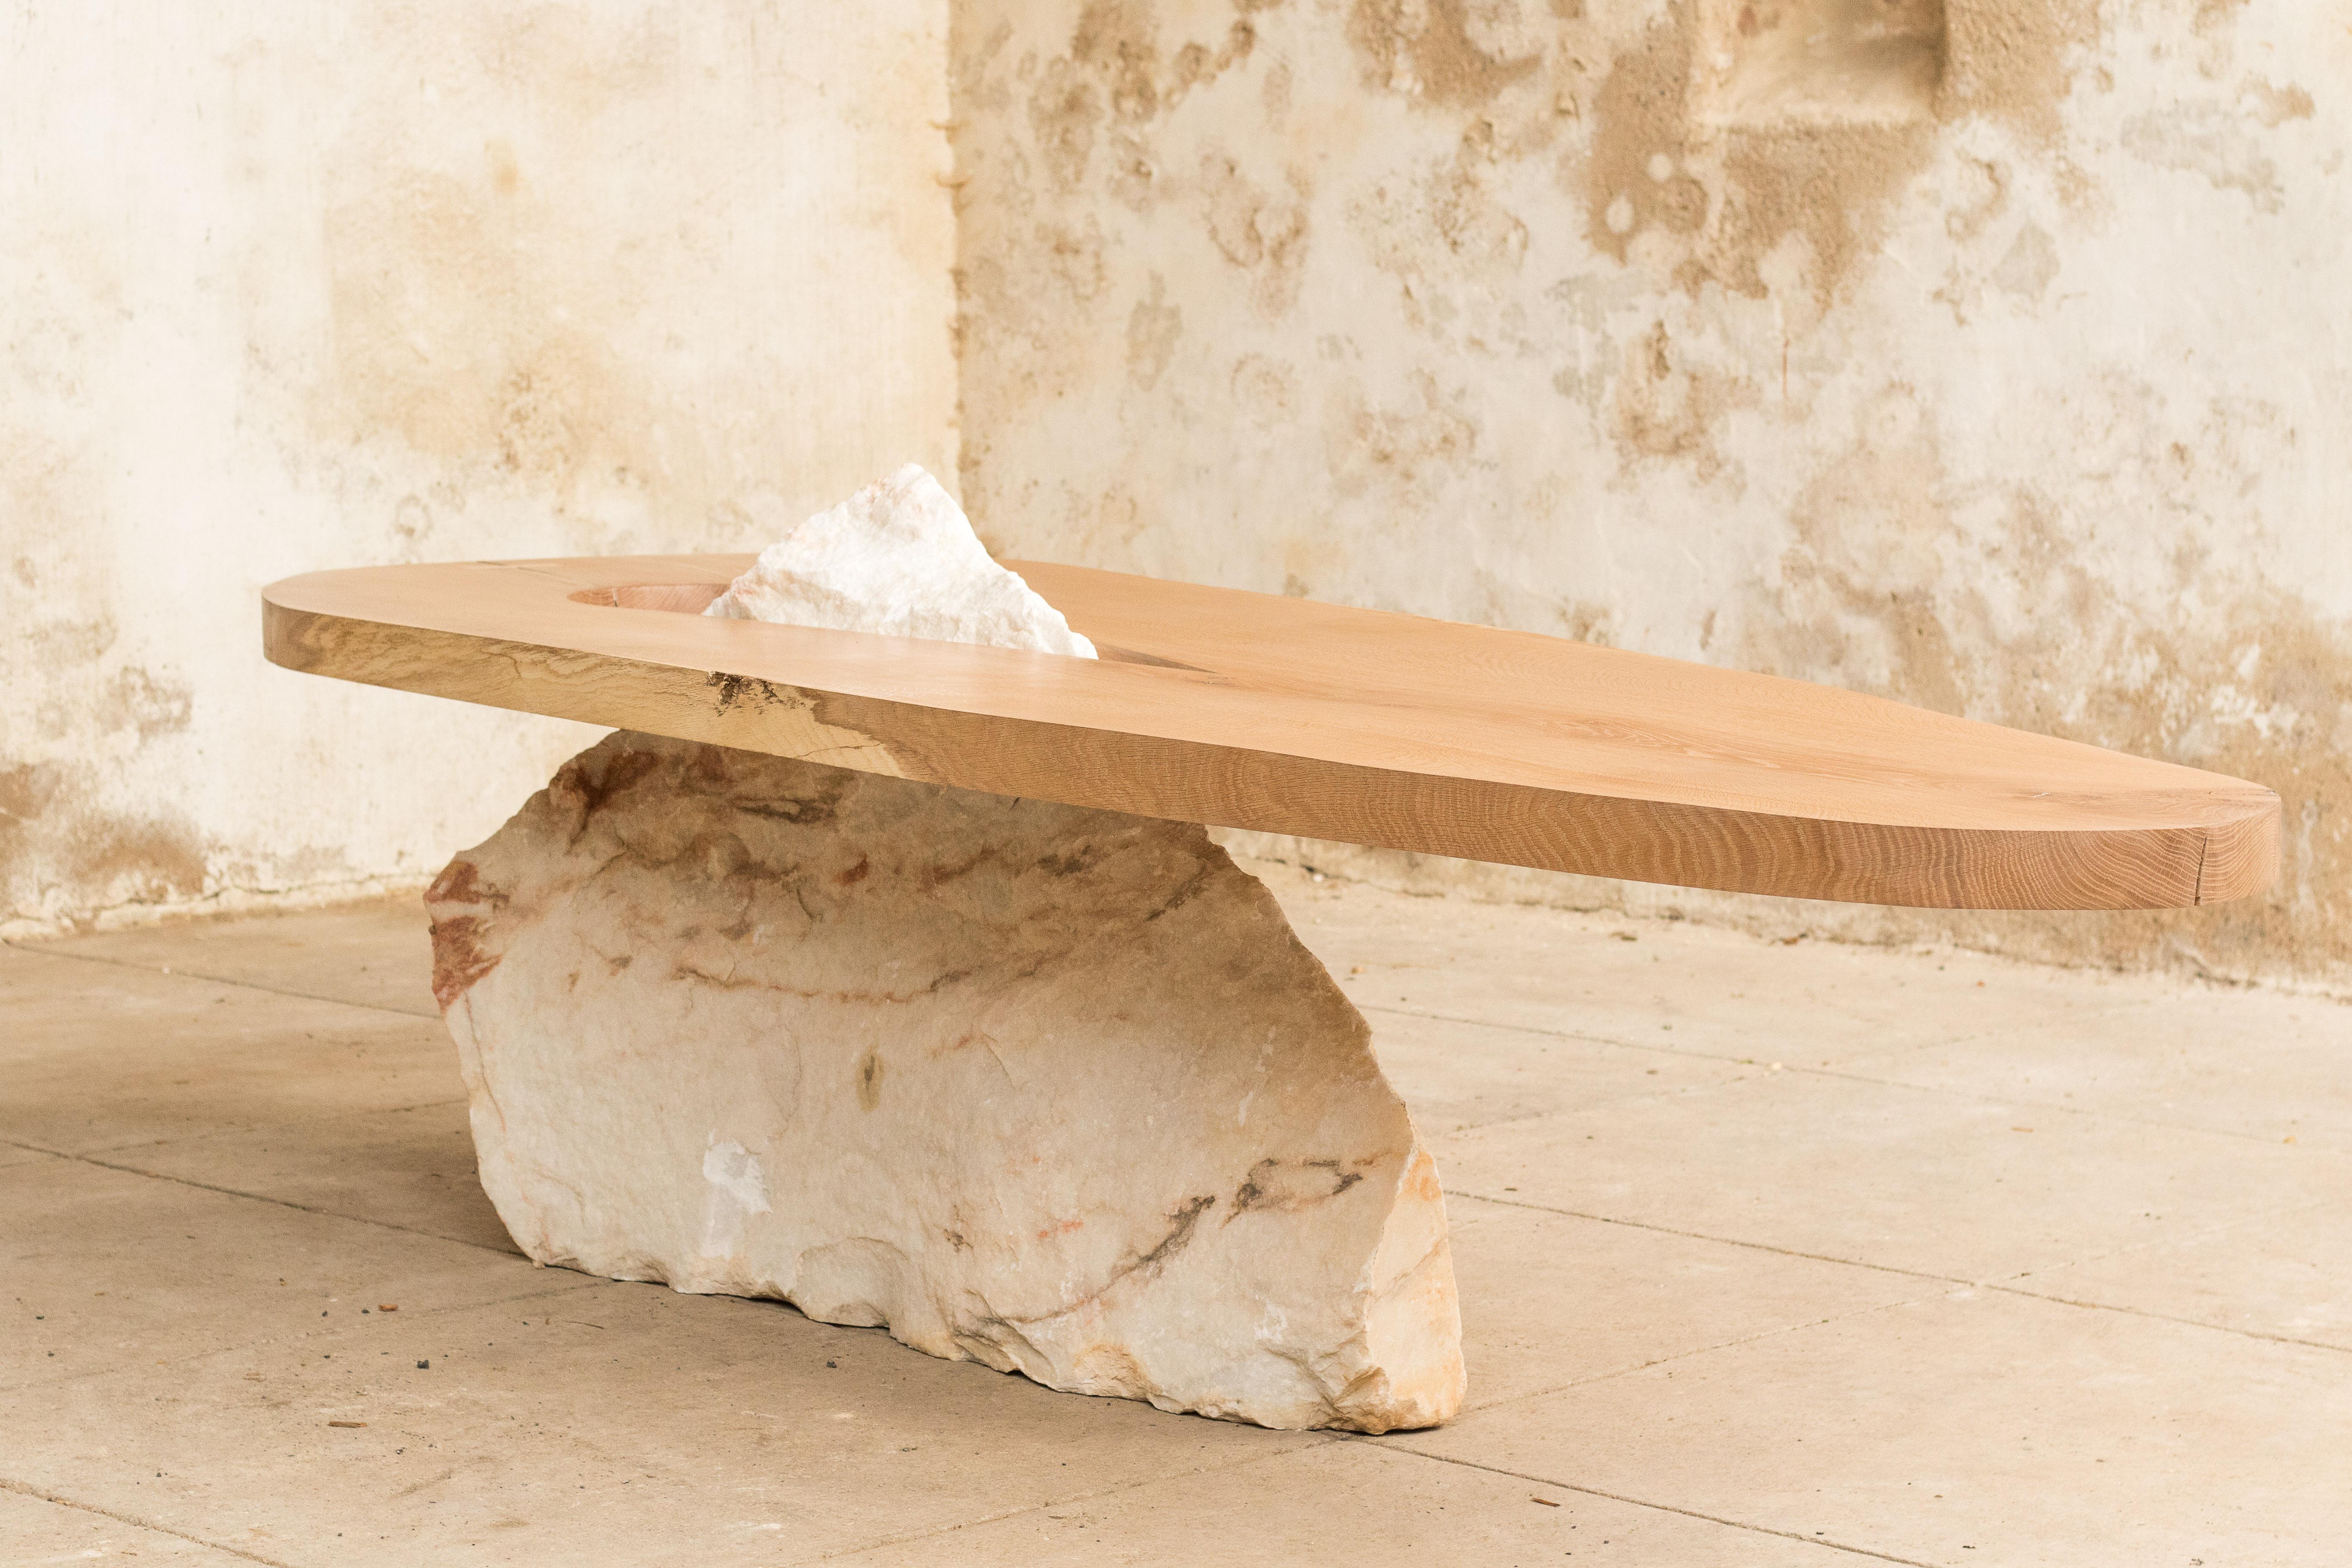 Mircea Anghel’s Pico Table Series is an ode to the volcanic island with the same name, located in the middle of the Atlantic Ocean. The table is built with only two parts: one highly controlled, treated, hand shaped piece of wood; the other a rock